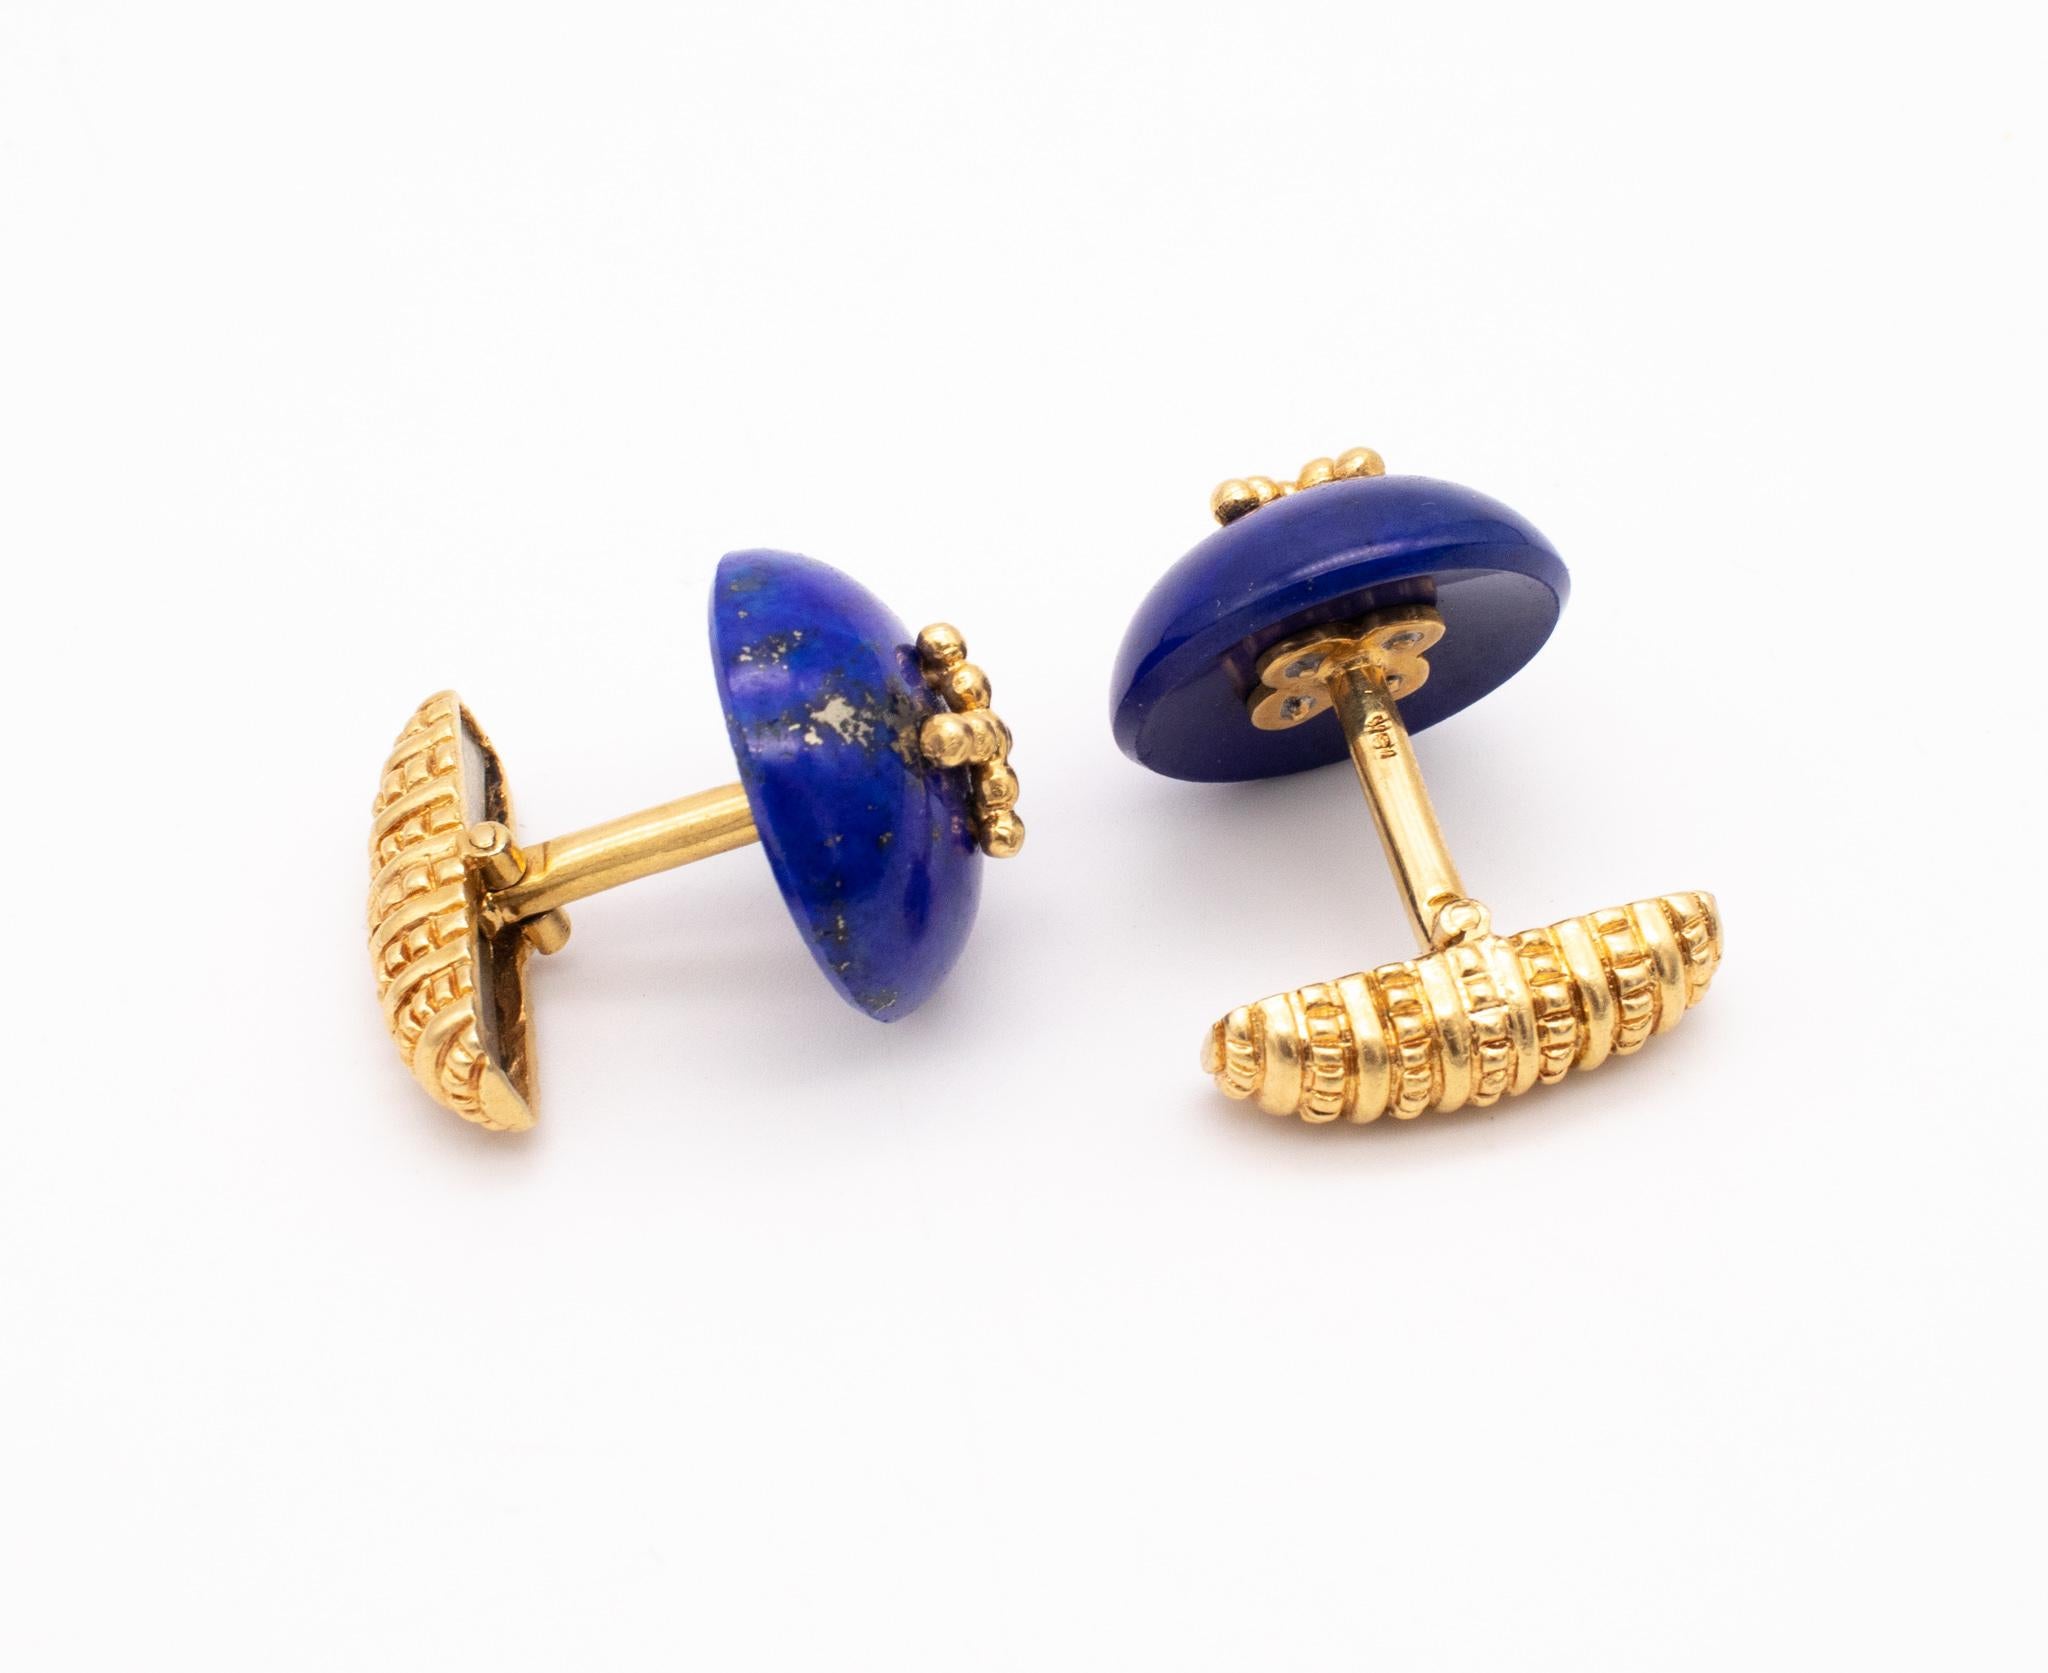 Modern Pair of Cufflinks in Textured 18Kt Yellow Gold with Lapis Lazuli For Sale 1